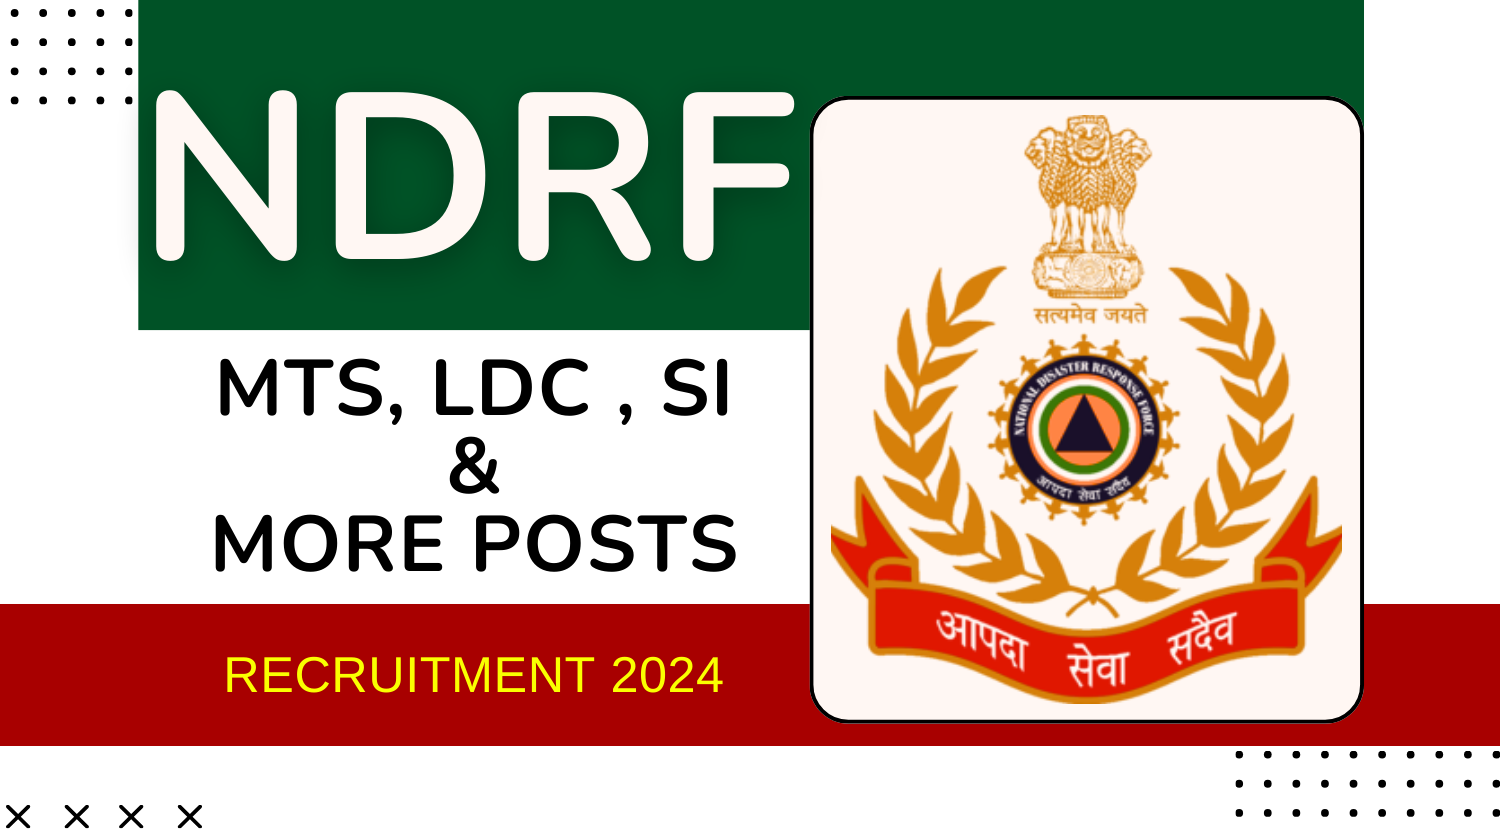 NDRF Recruitment 2024 for Various MTS, LDC, SI and More Posts